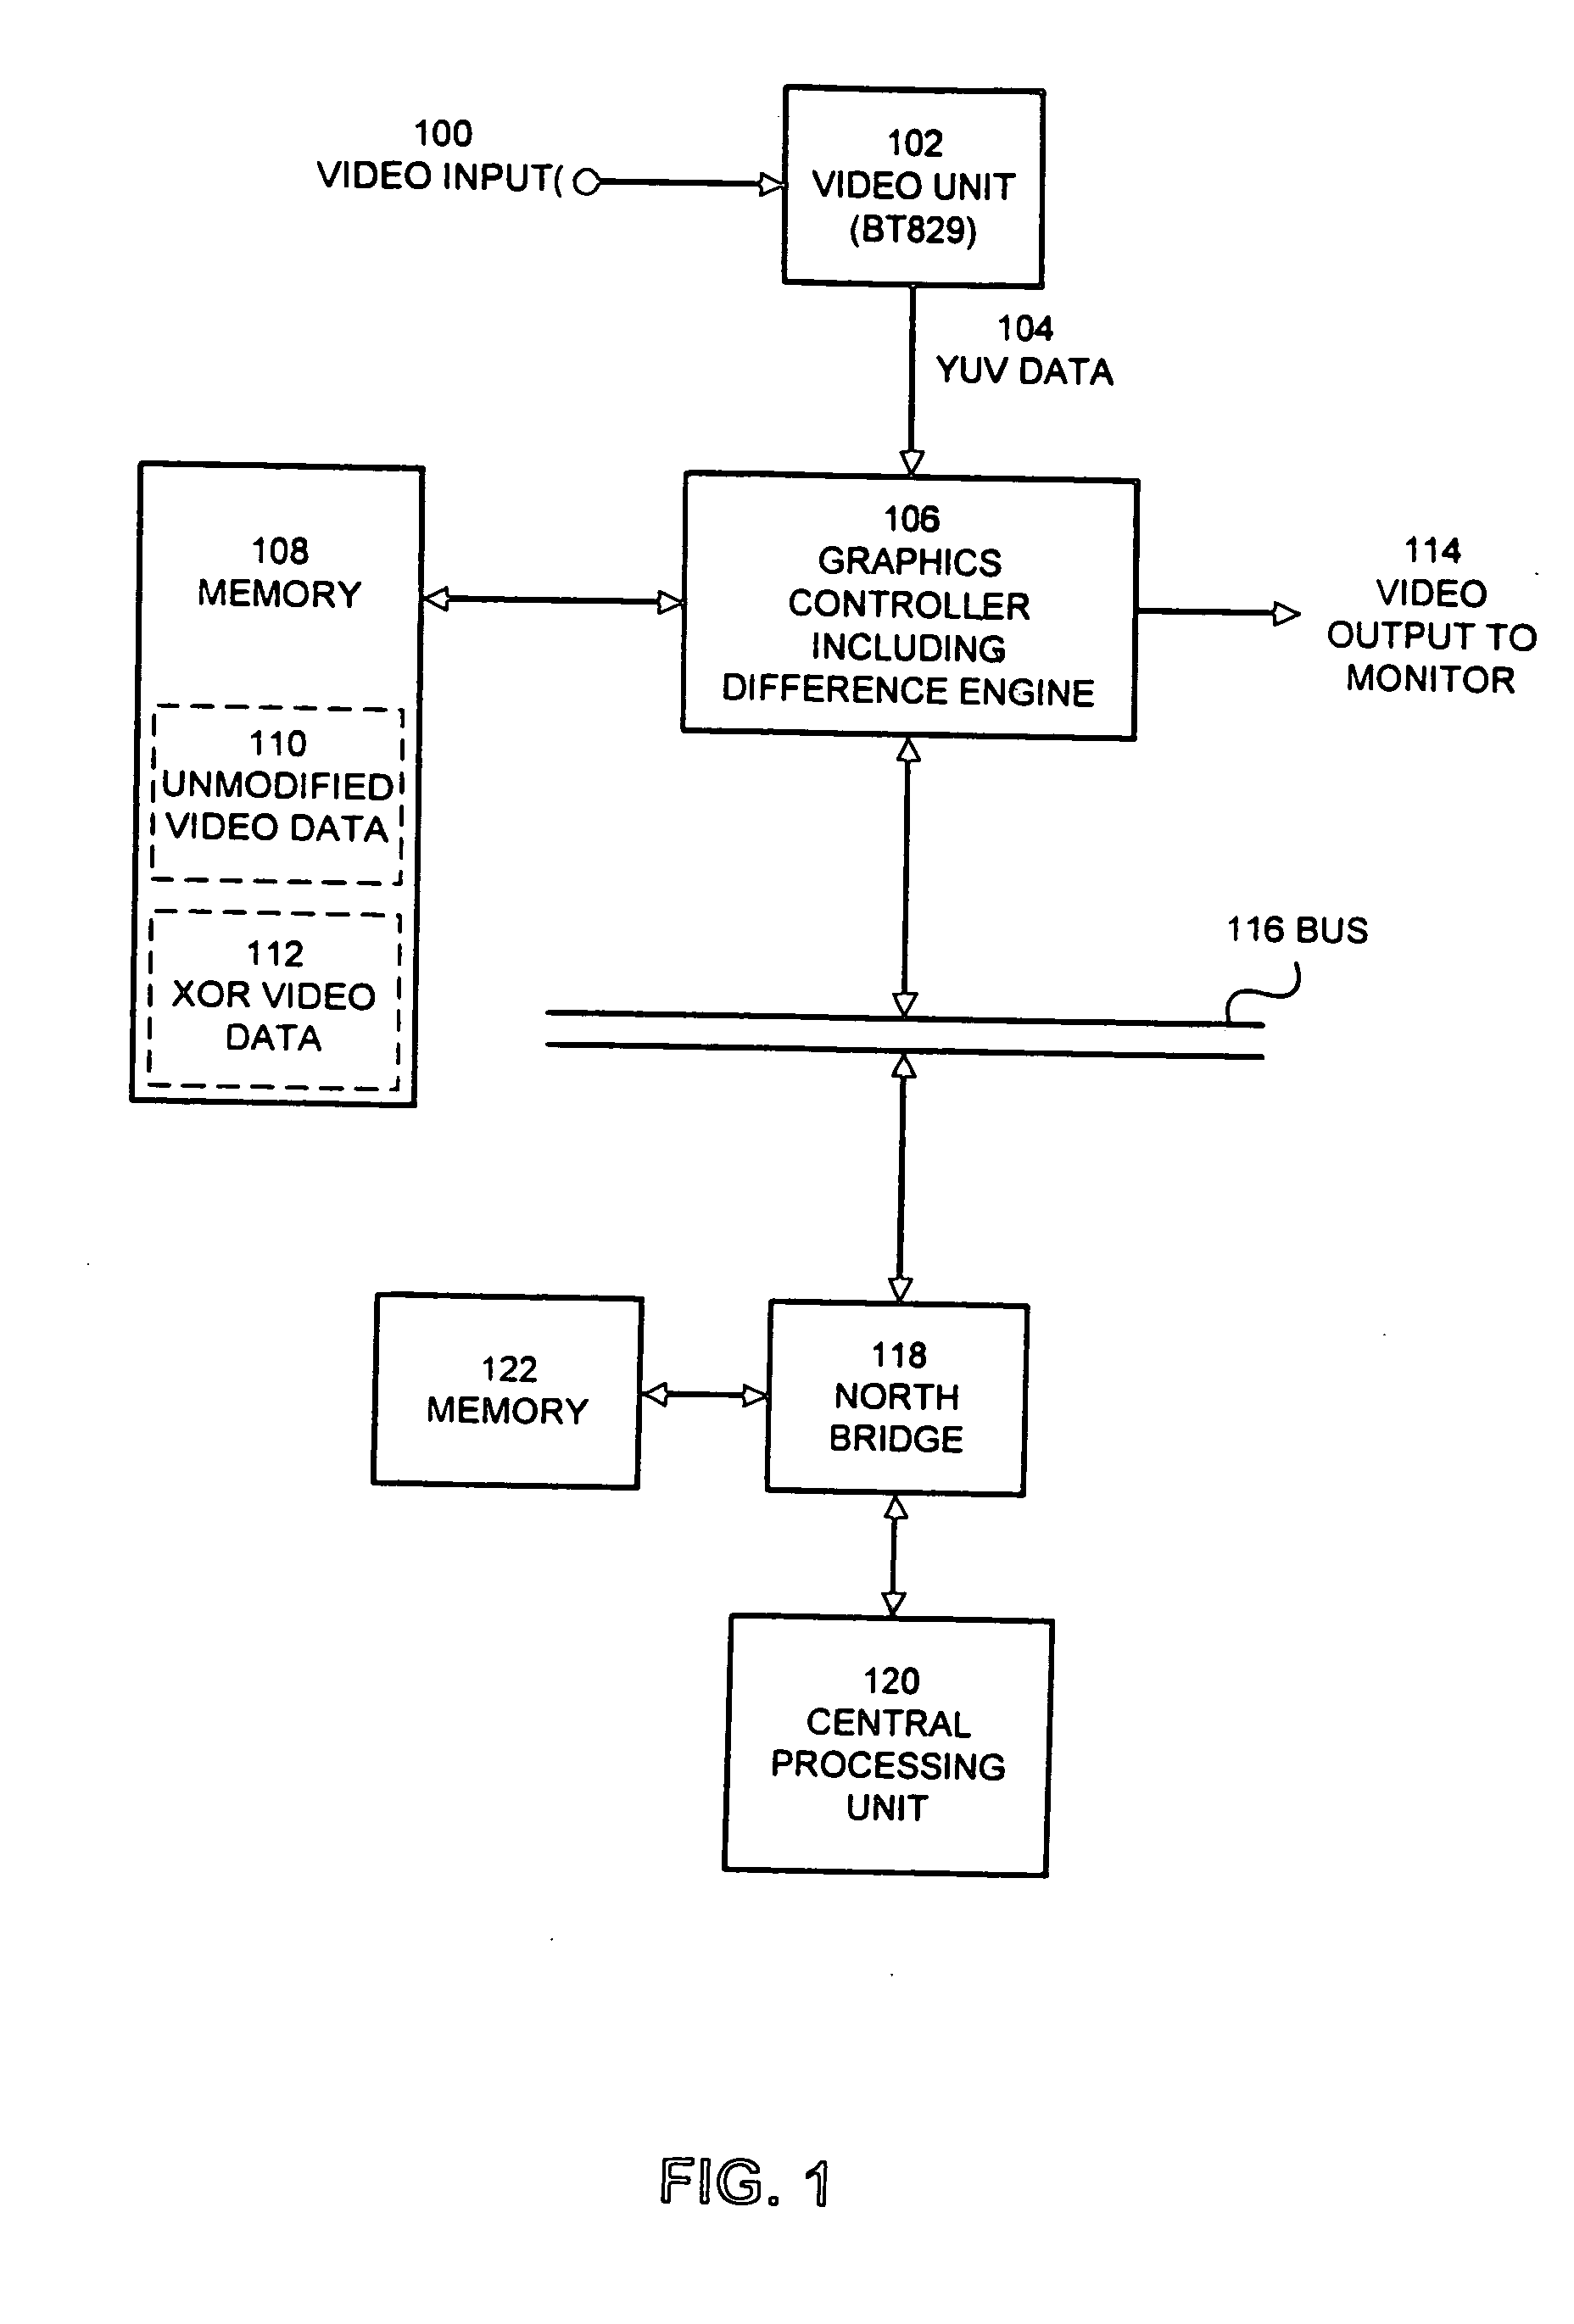 Method for assisting video compression in a computer system